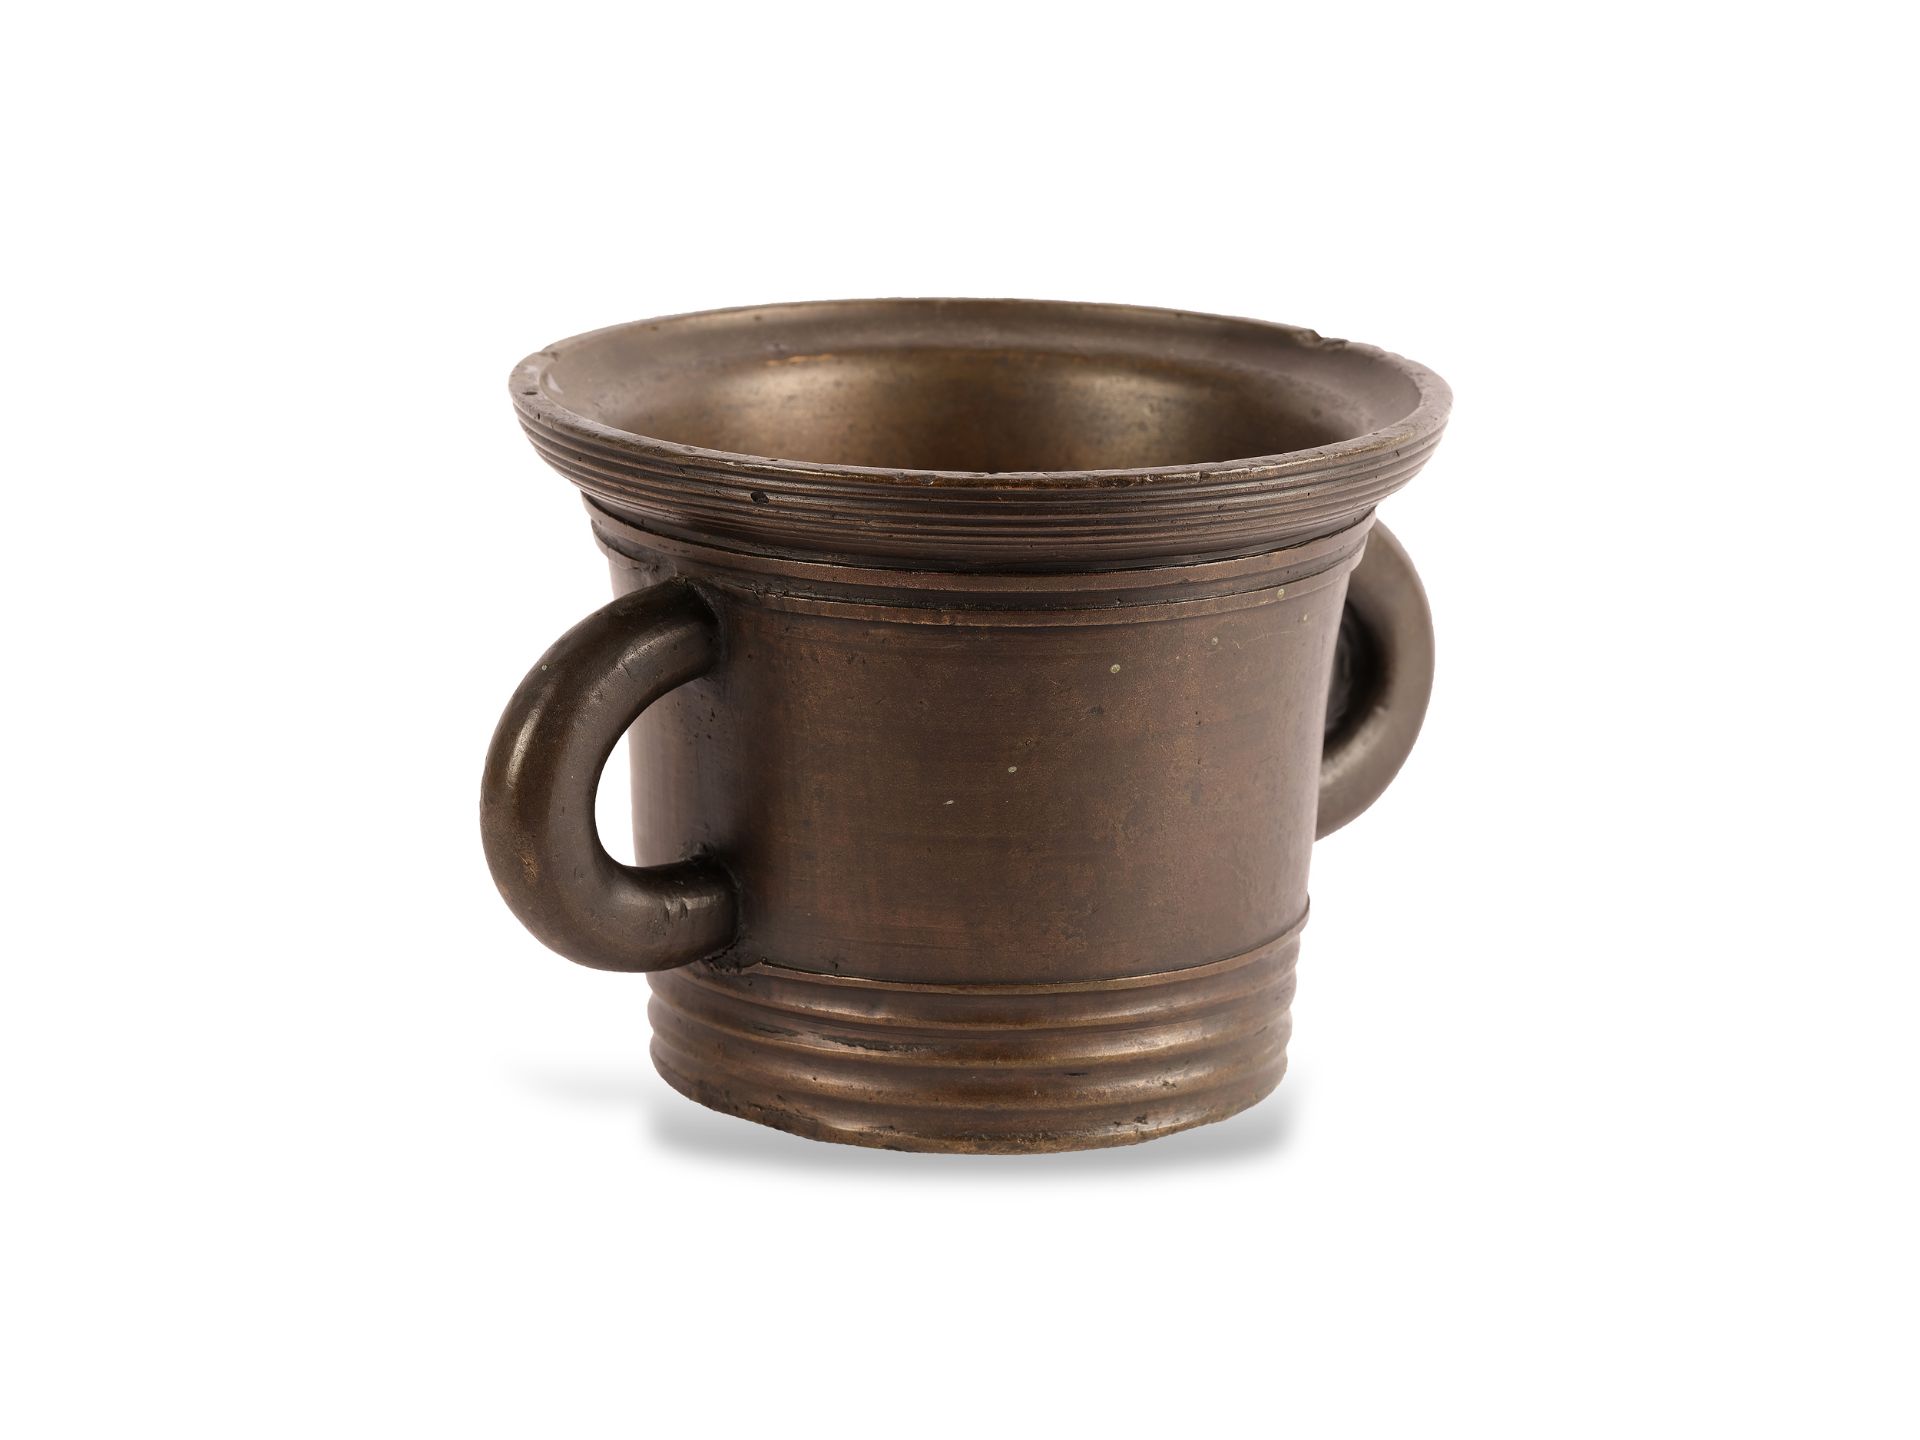 Mortar with linear decor & round handle, 16th/17th century, Cast bronze - Image 2 of 2